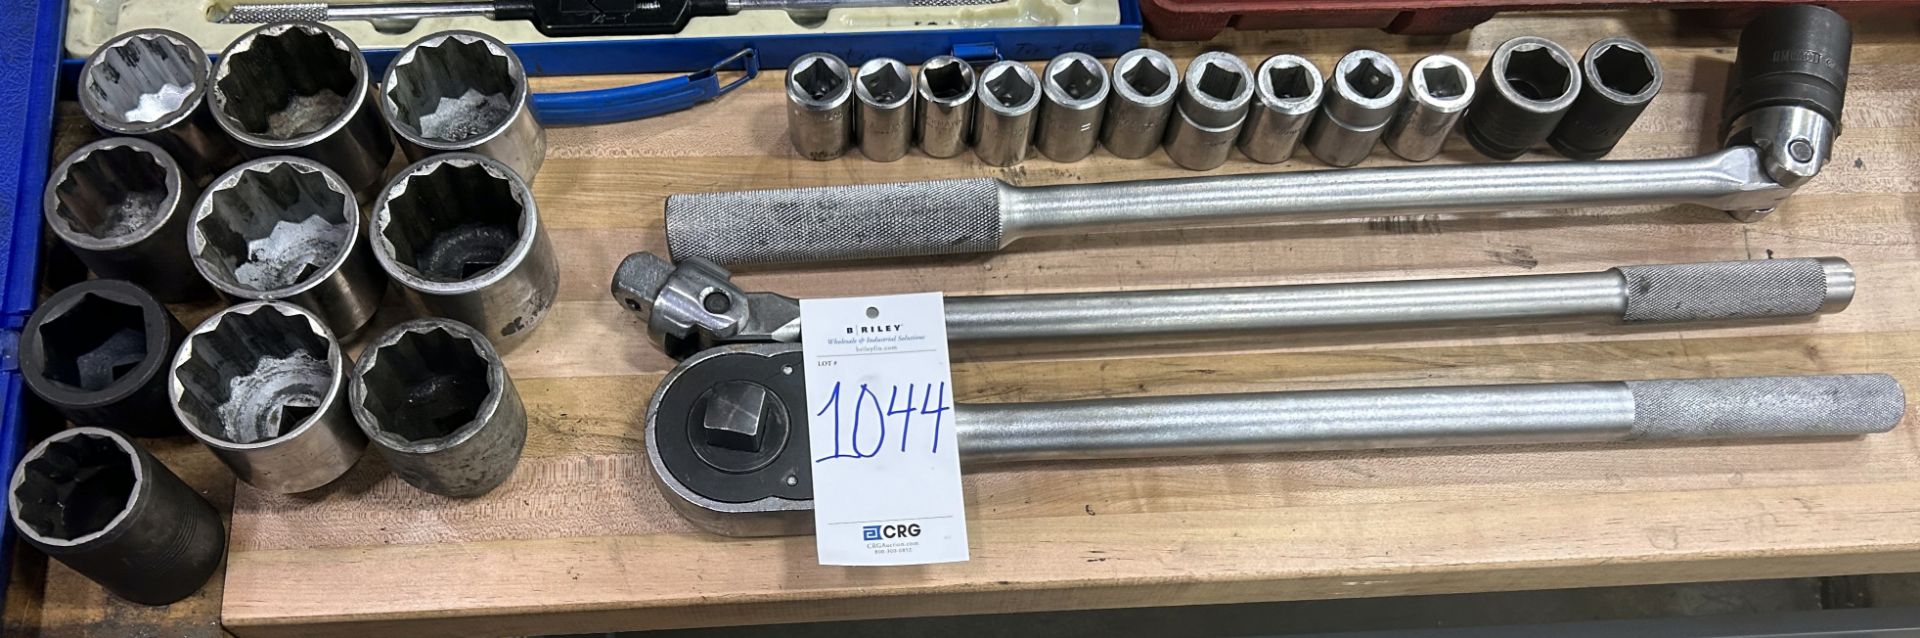 large socket set with (3) wrenches